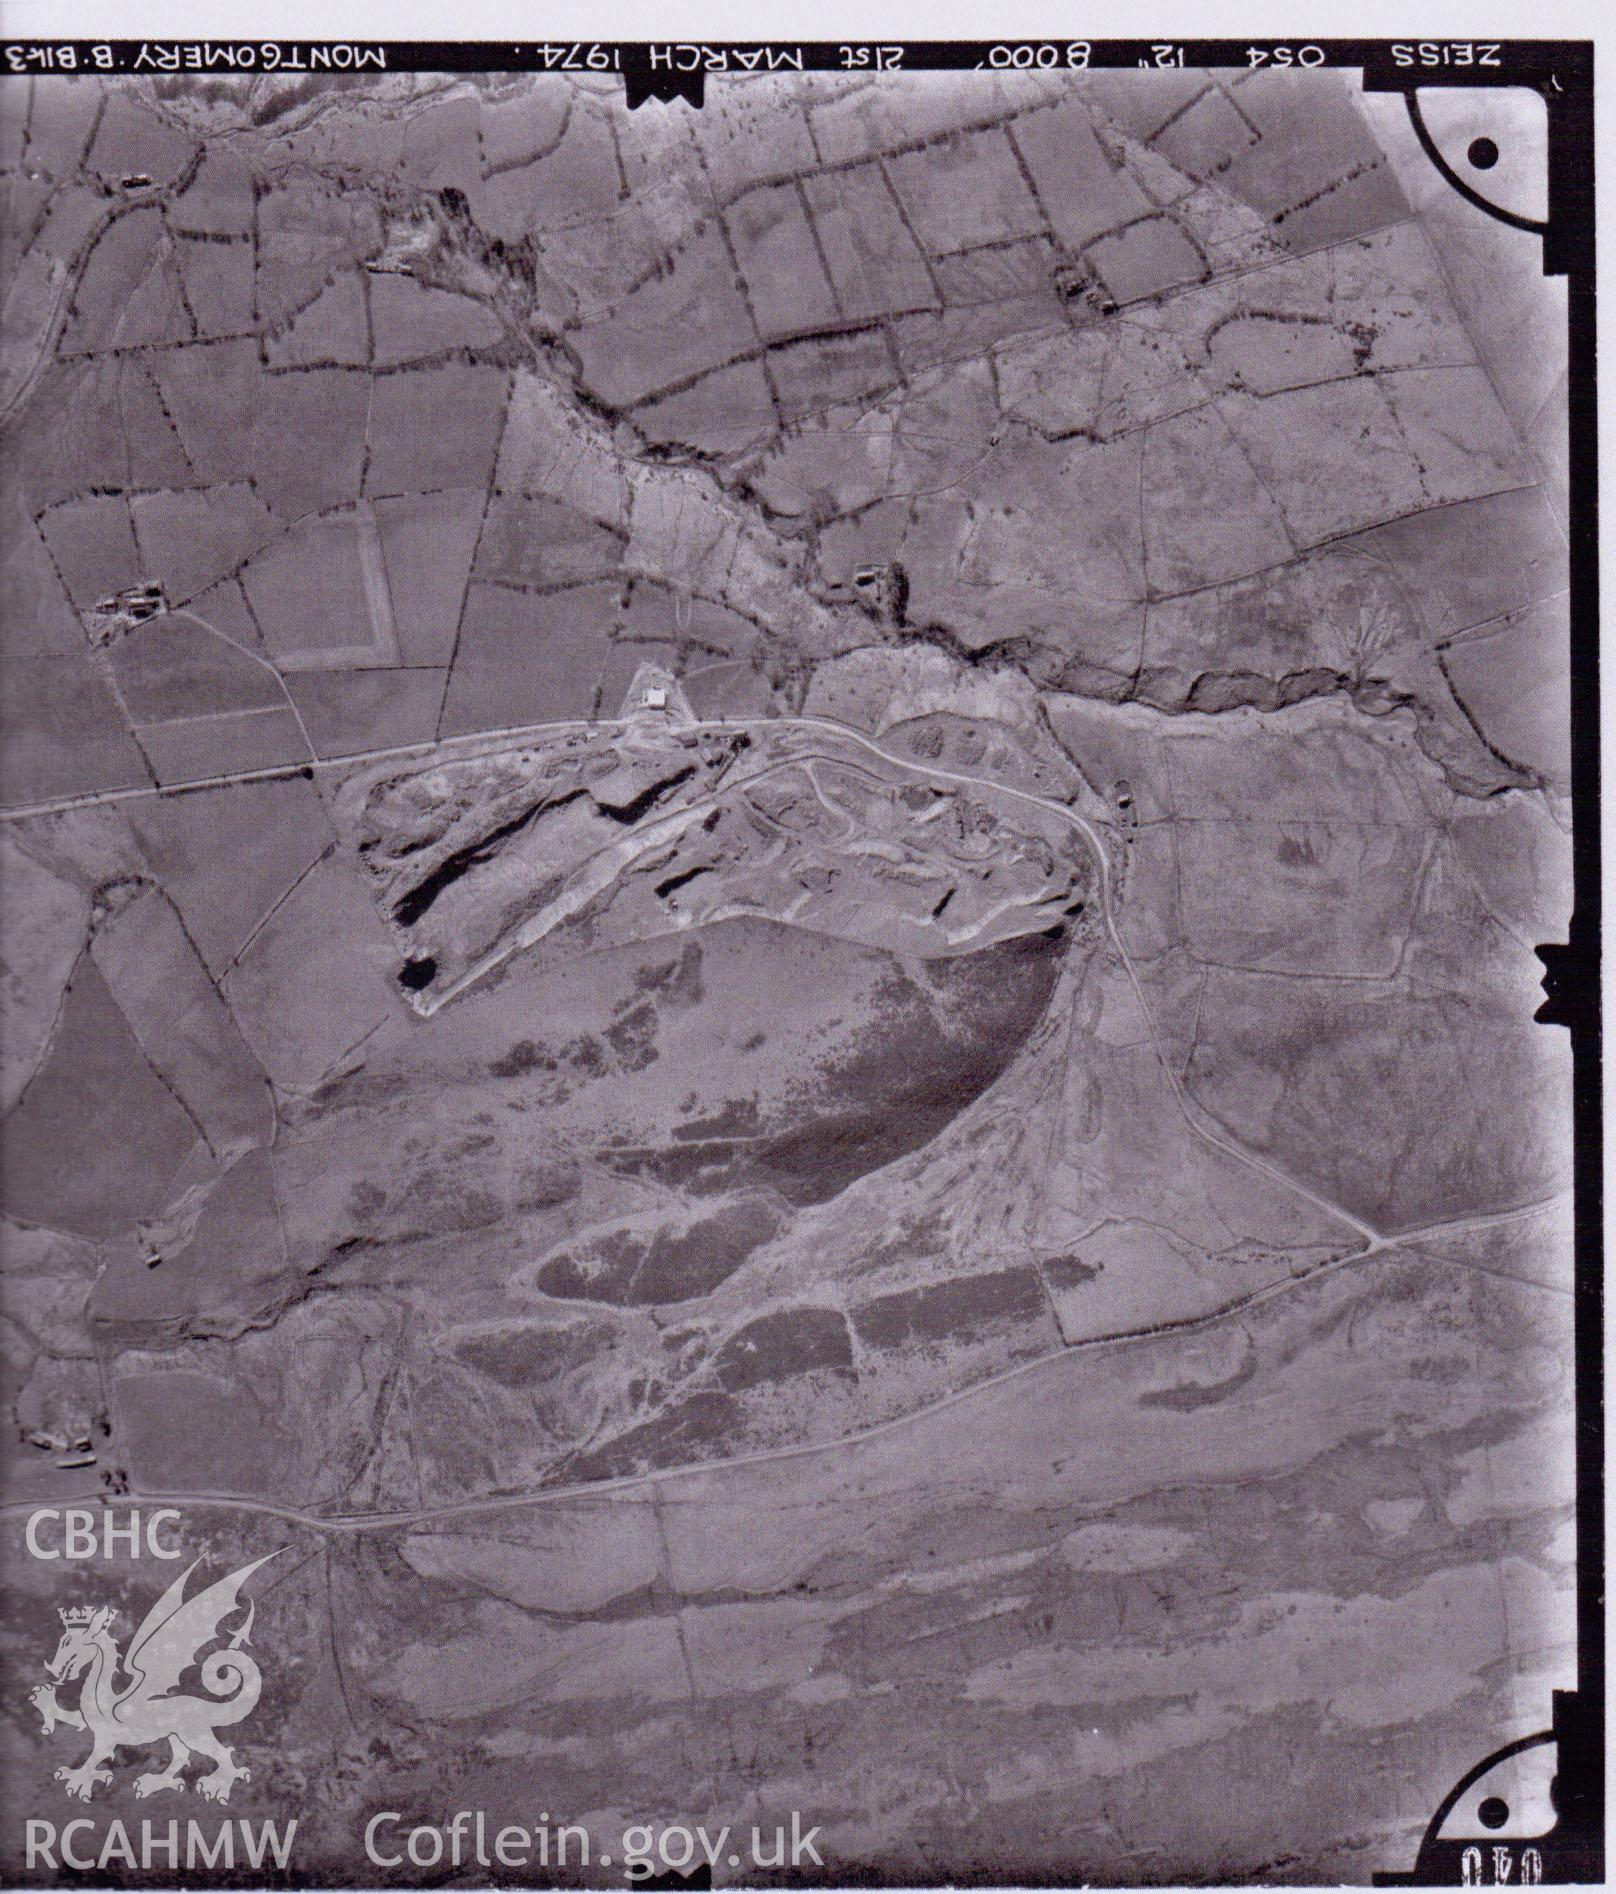 1974 OS aerial photograph showing assessment area for Tan y Foel Quarry, Cefn Coch, report no. 1089.